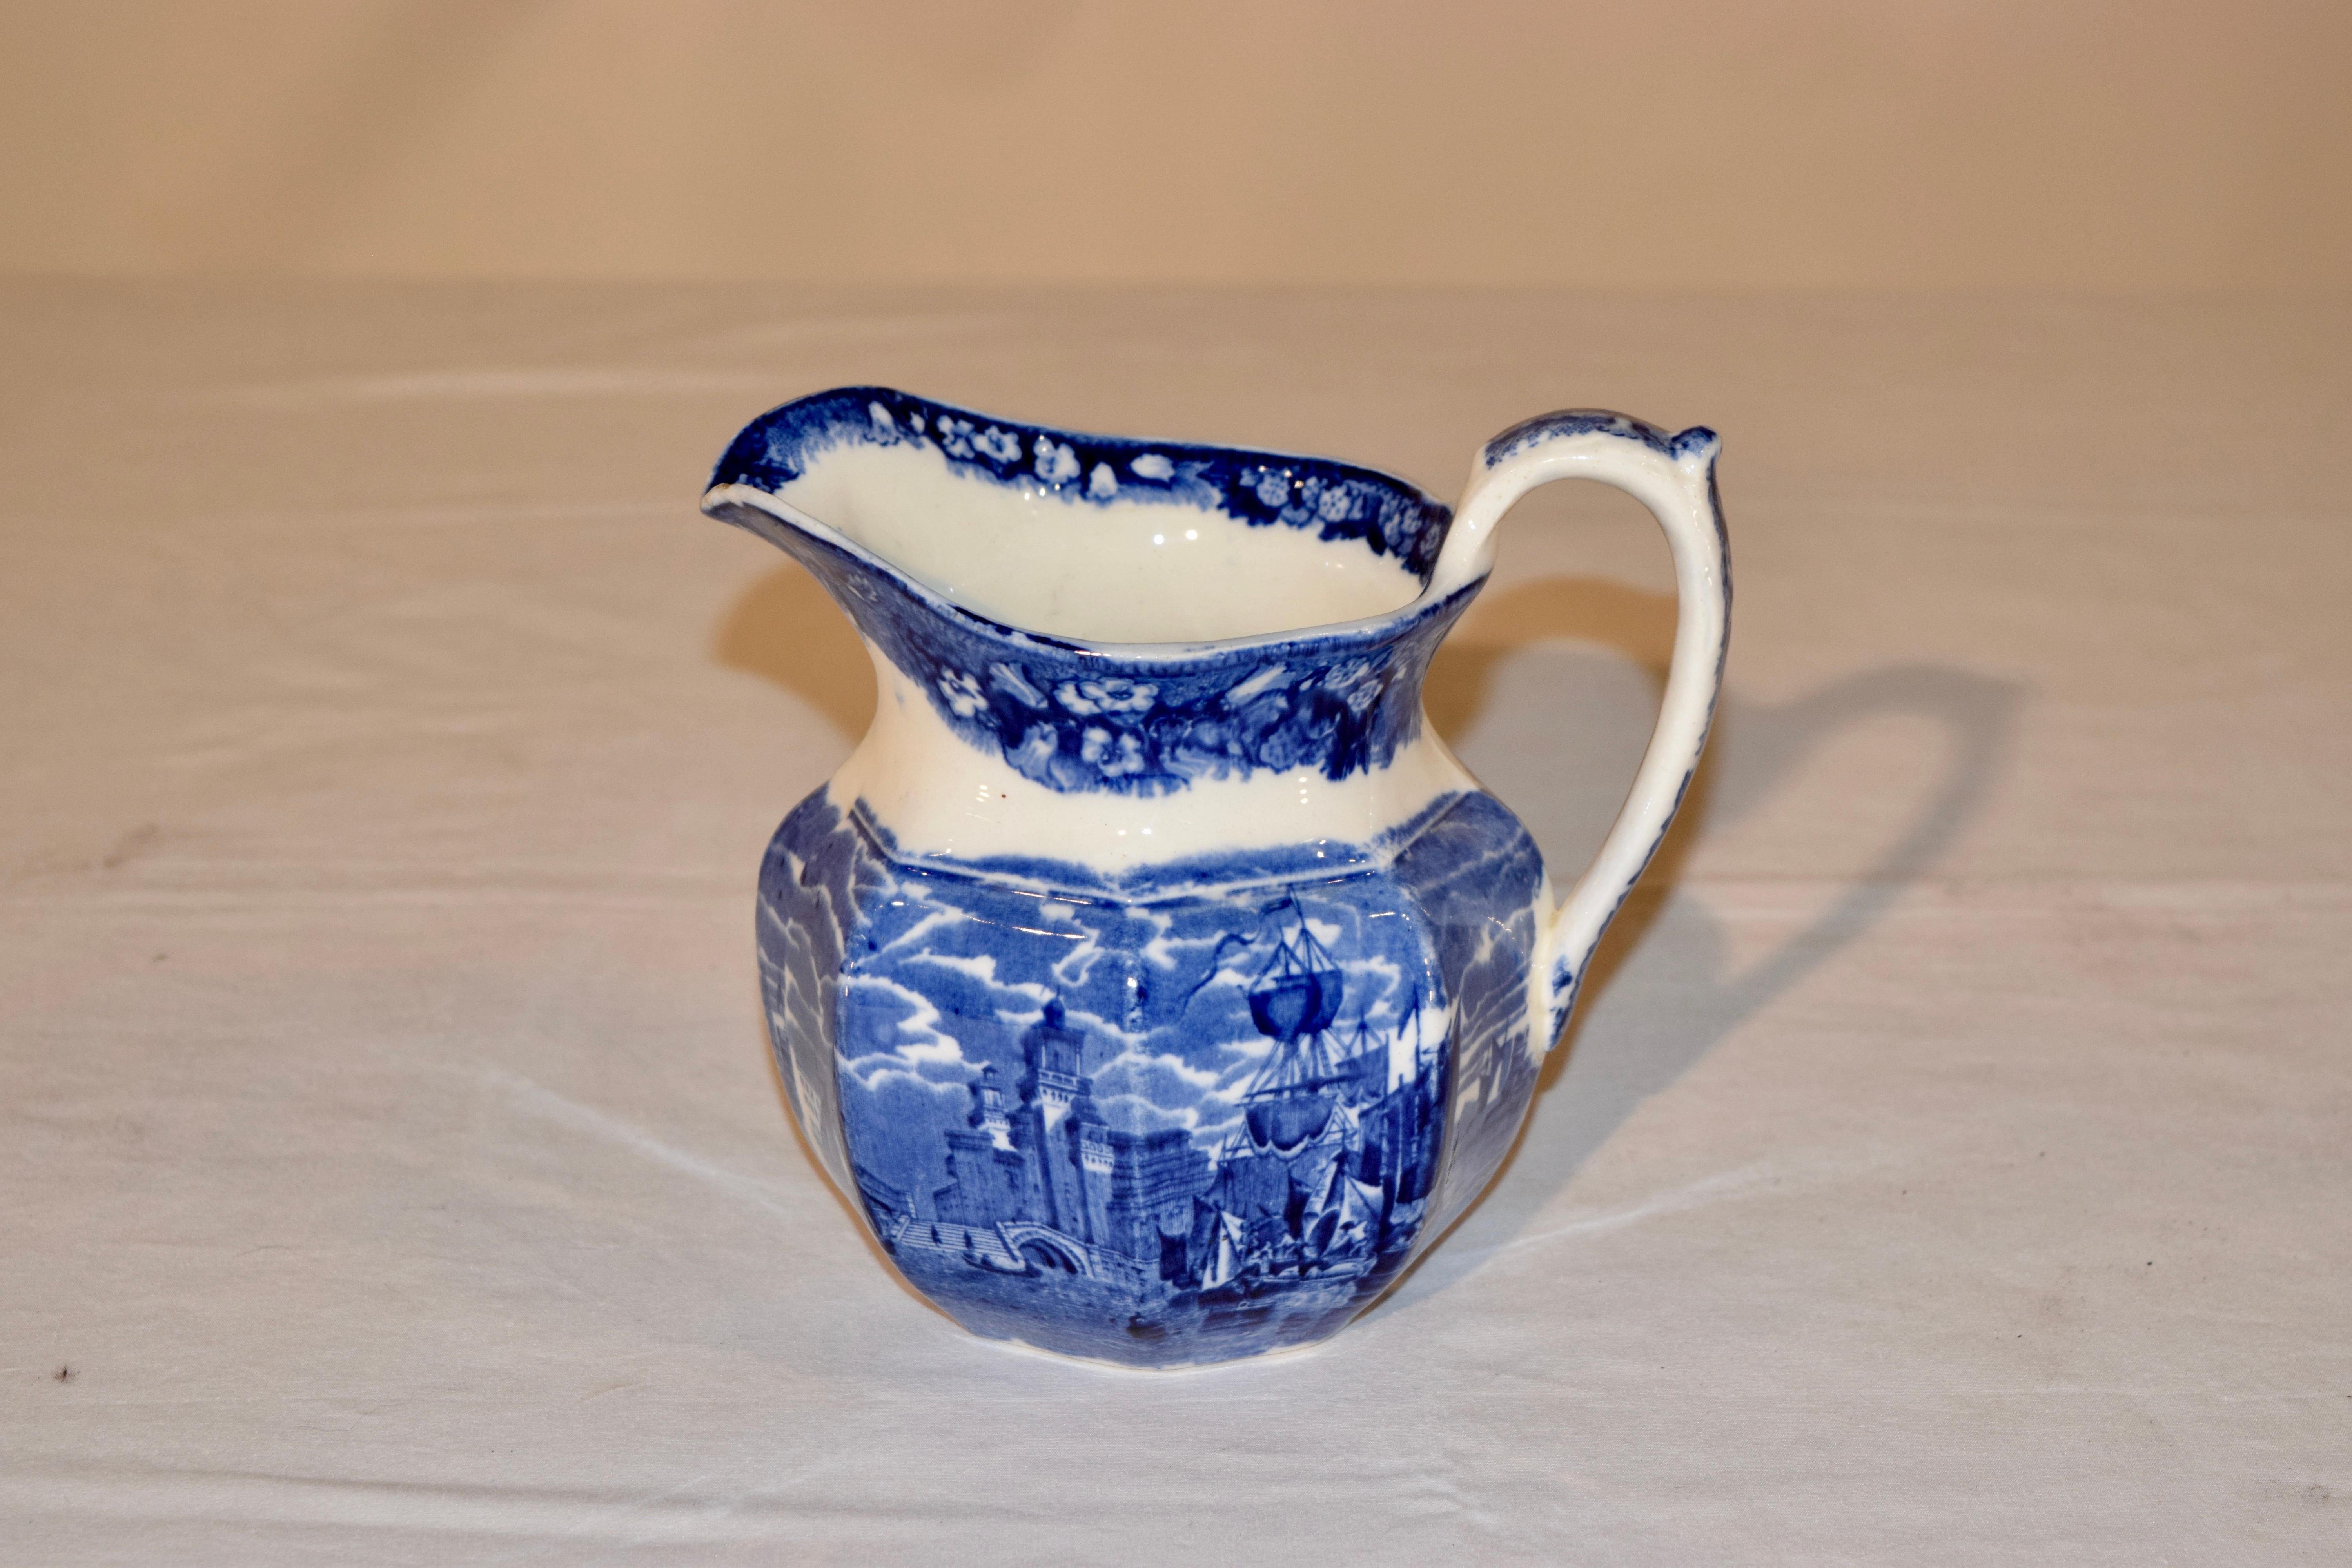 Wedgwood pitcher in the 